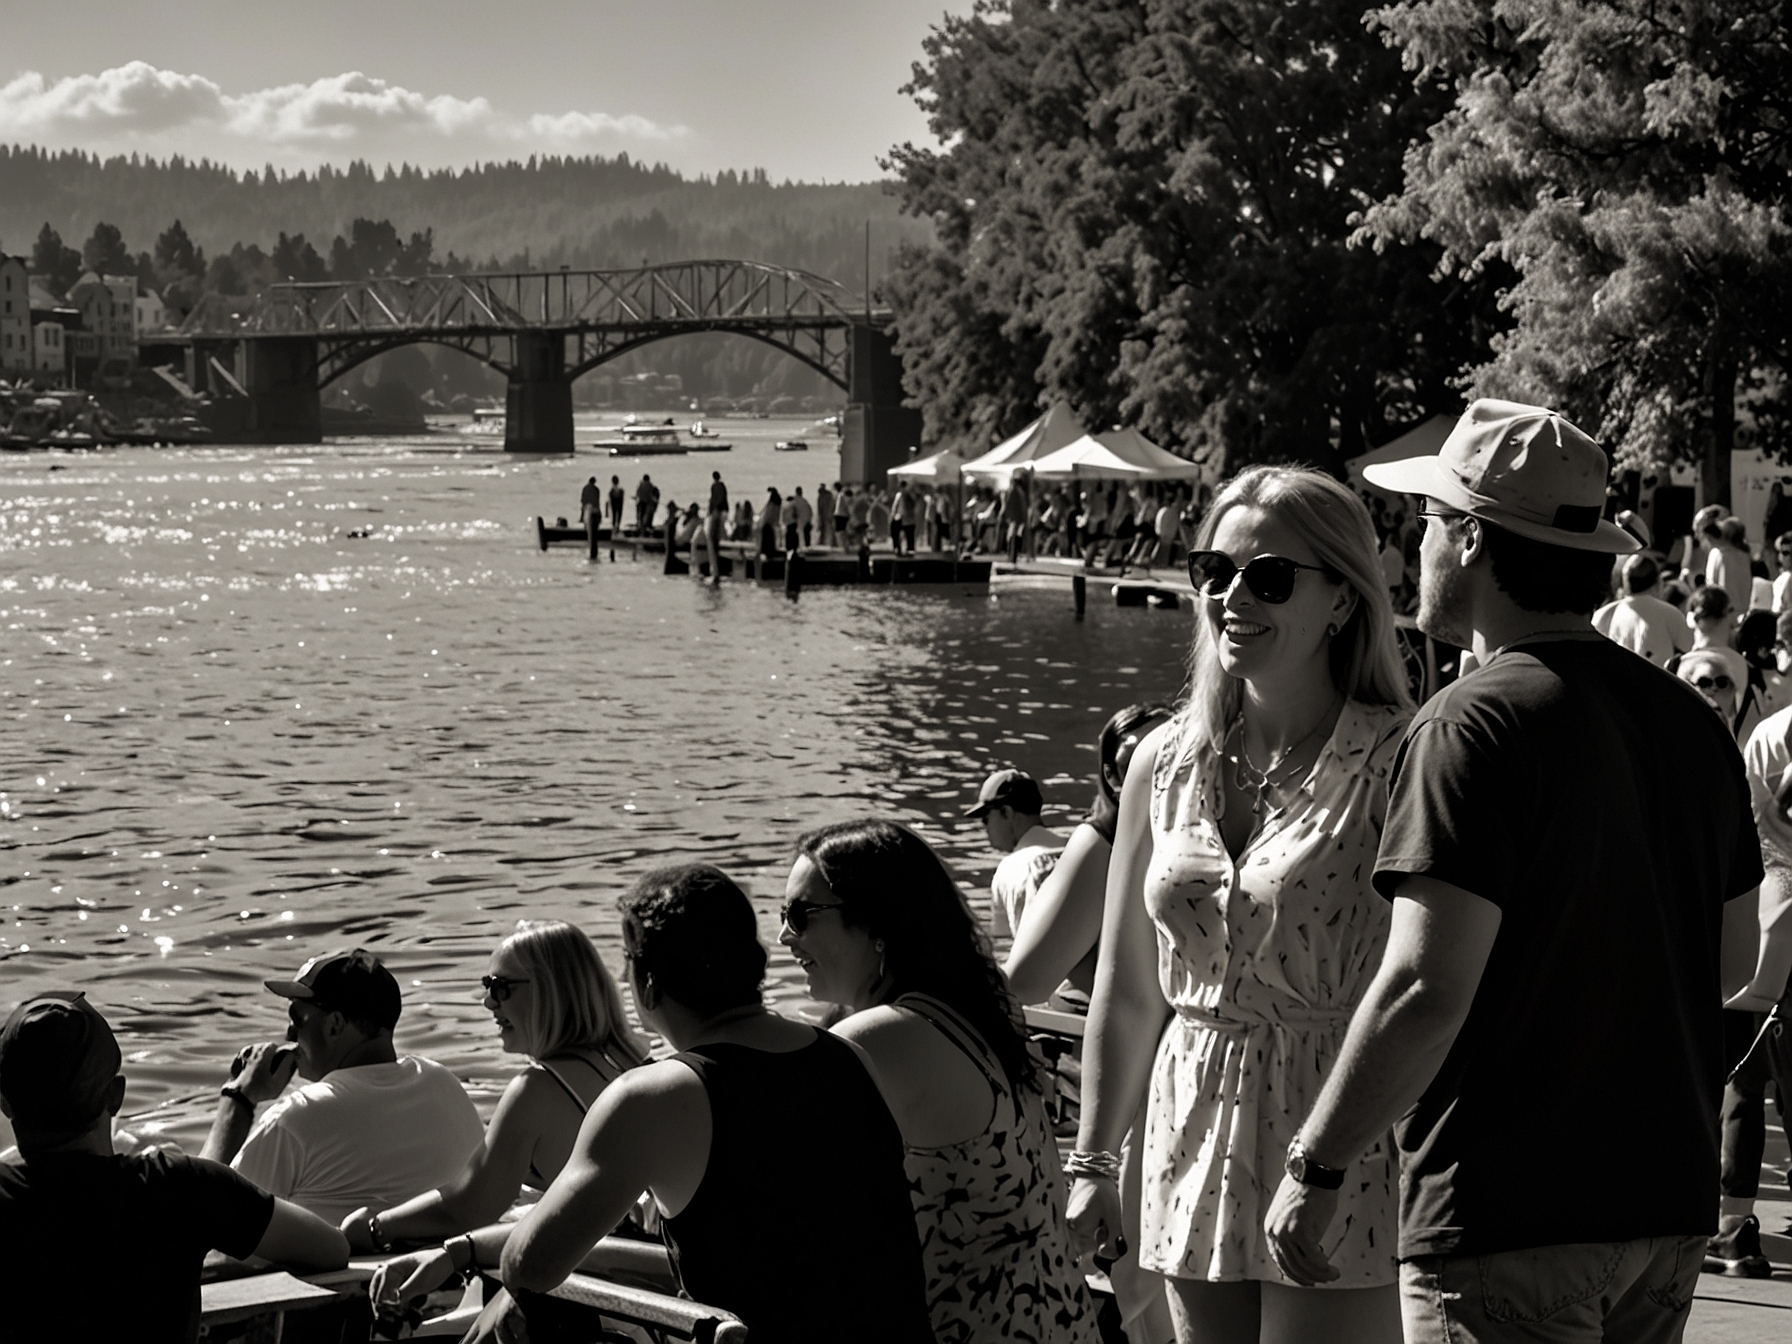 Music lovers enjoy a sunny day at the Waterfront Blues Festival. Multiple stages host live performances by blues artists against the picturesque backdrop of the Willamette River.